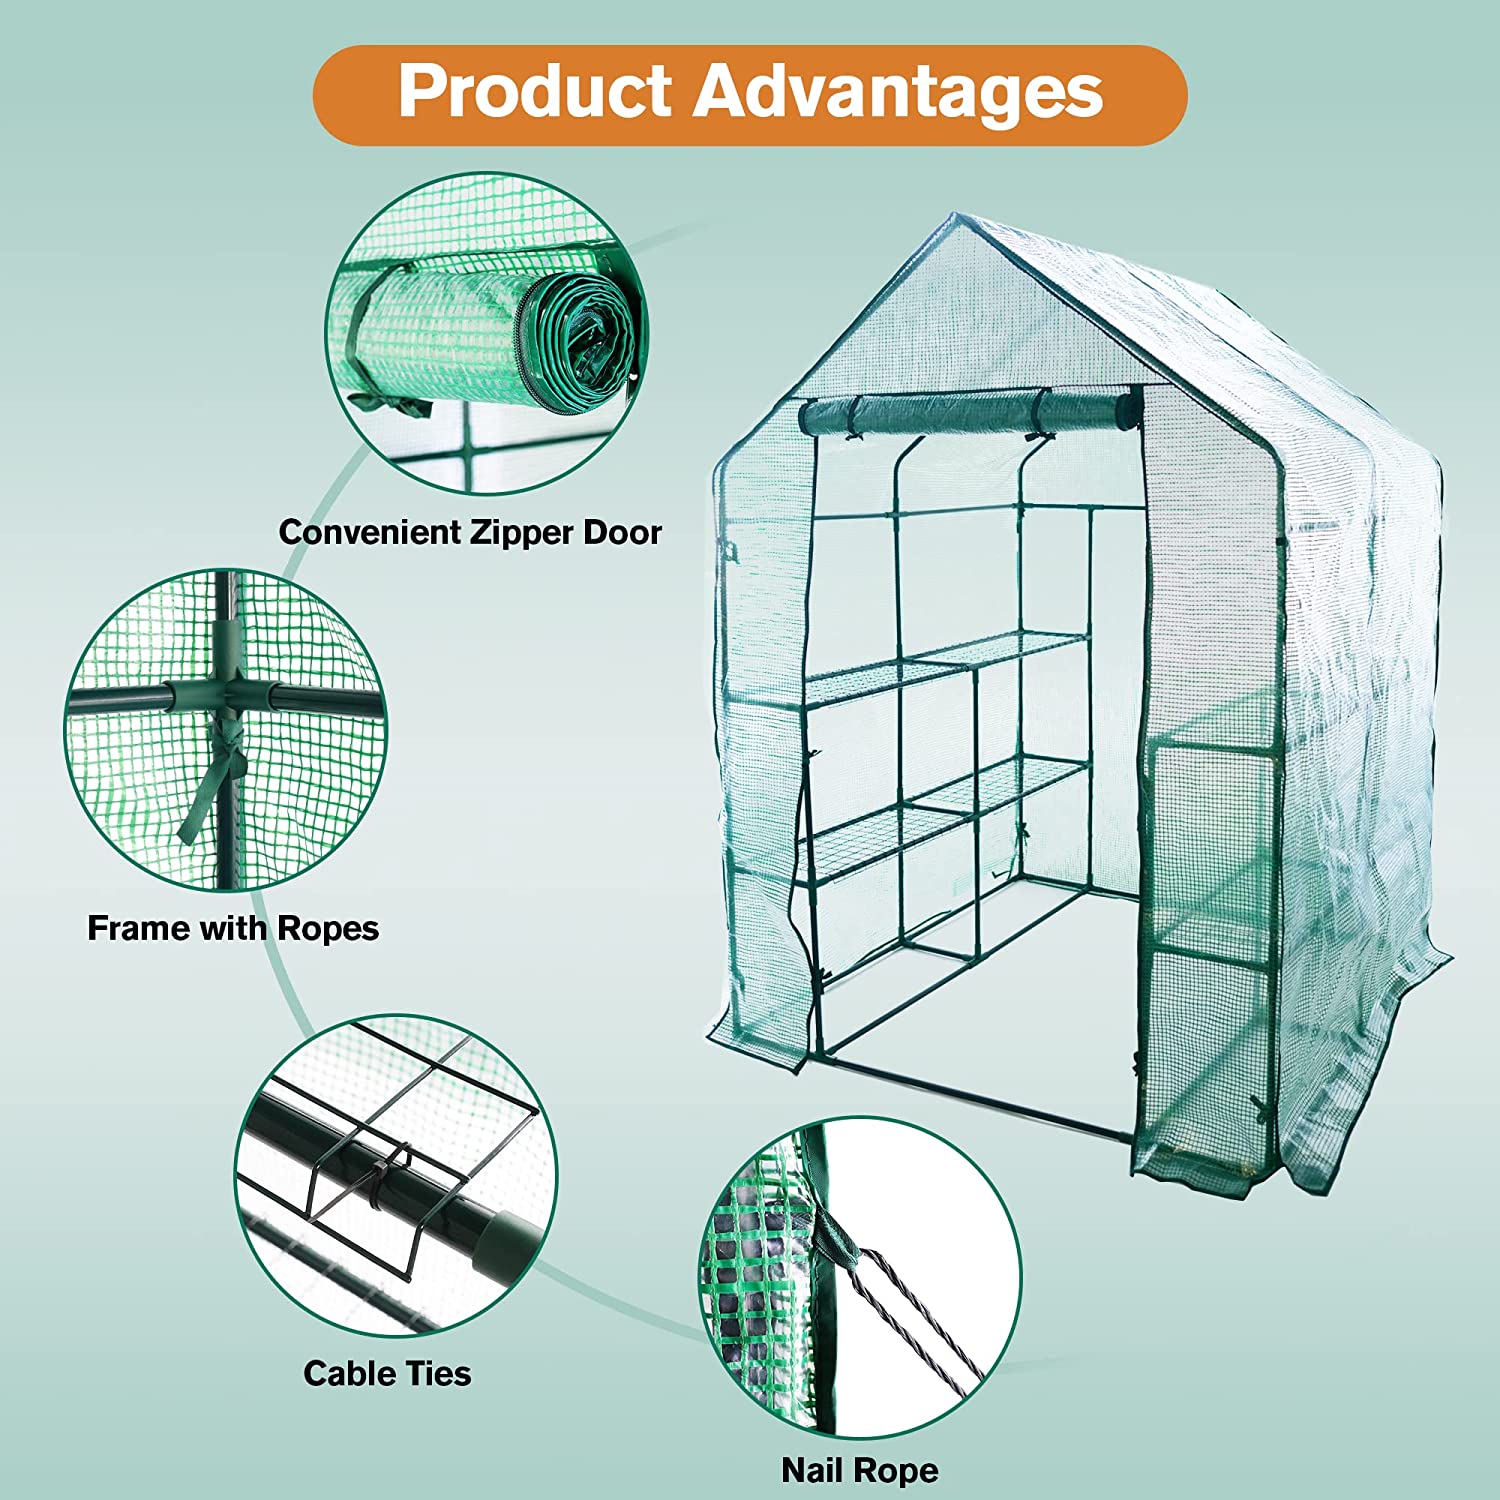 8 Shelves 3 Tiers Walk-in Greenhouse 56.3"L x 56.3"W x 76.8"H Portable Walk In Outdoor Planter House w/ Pegs Ropes